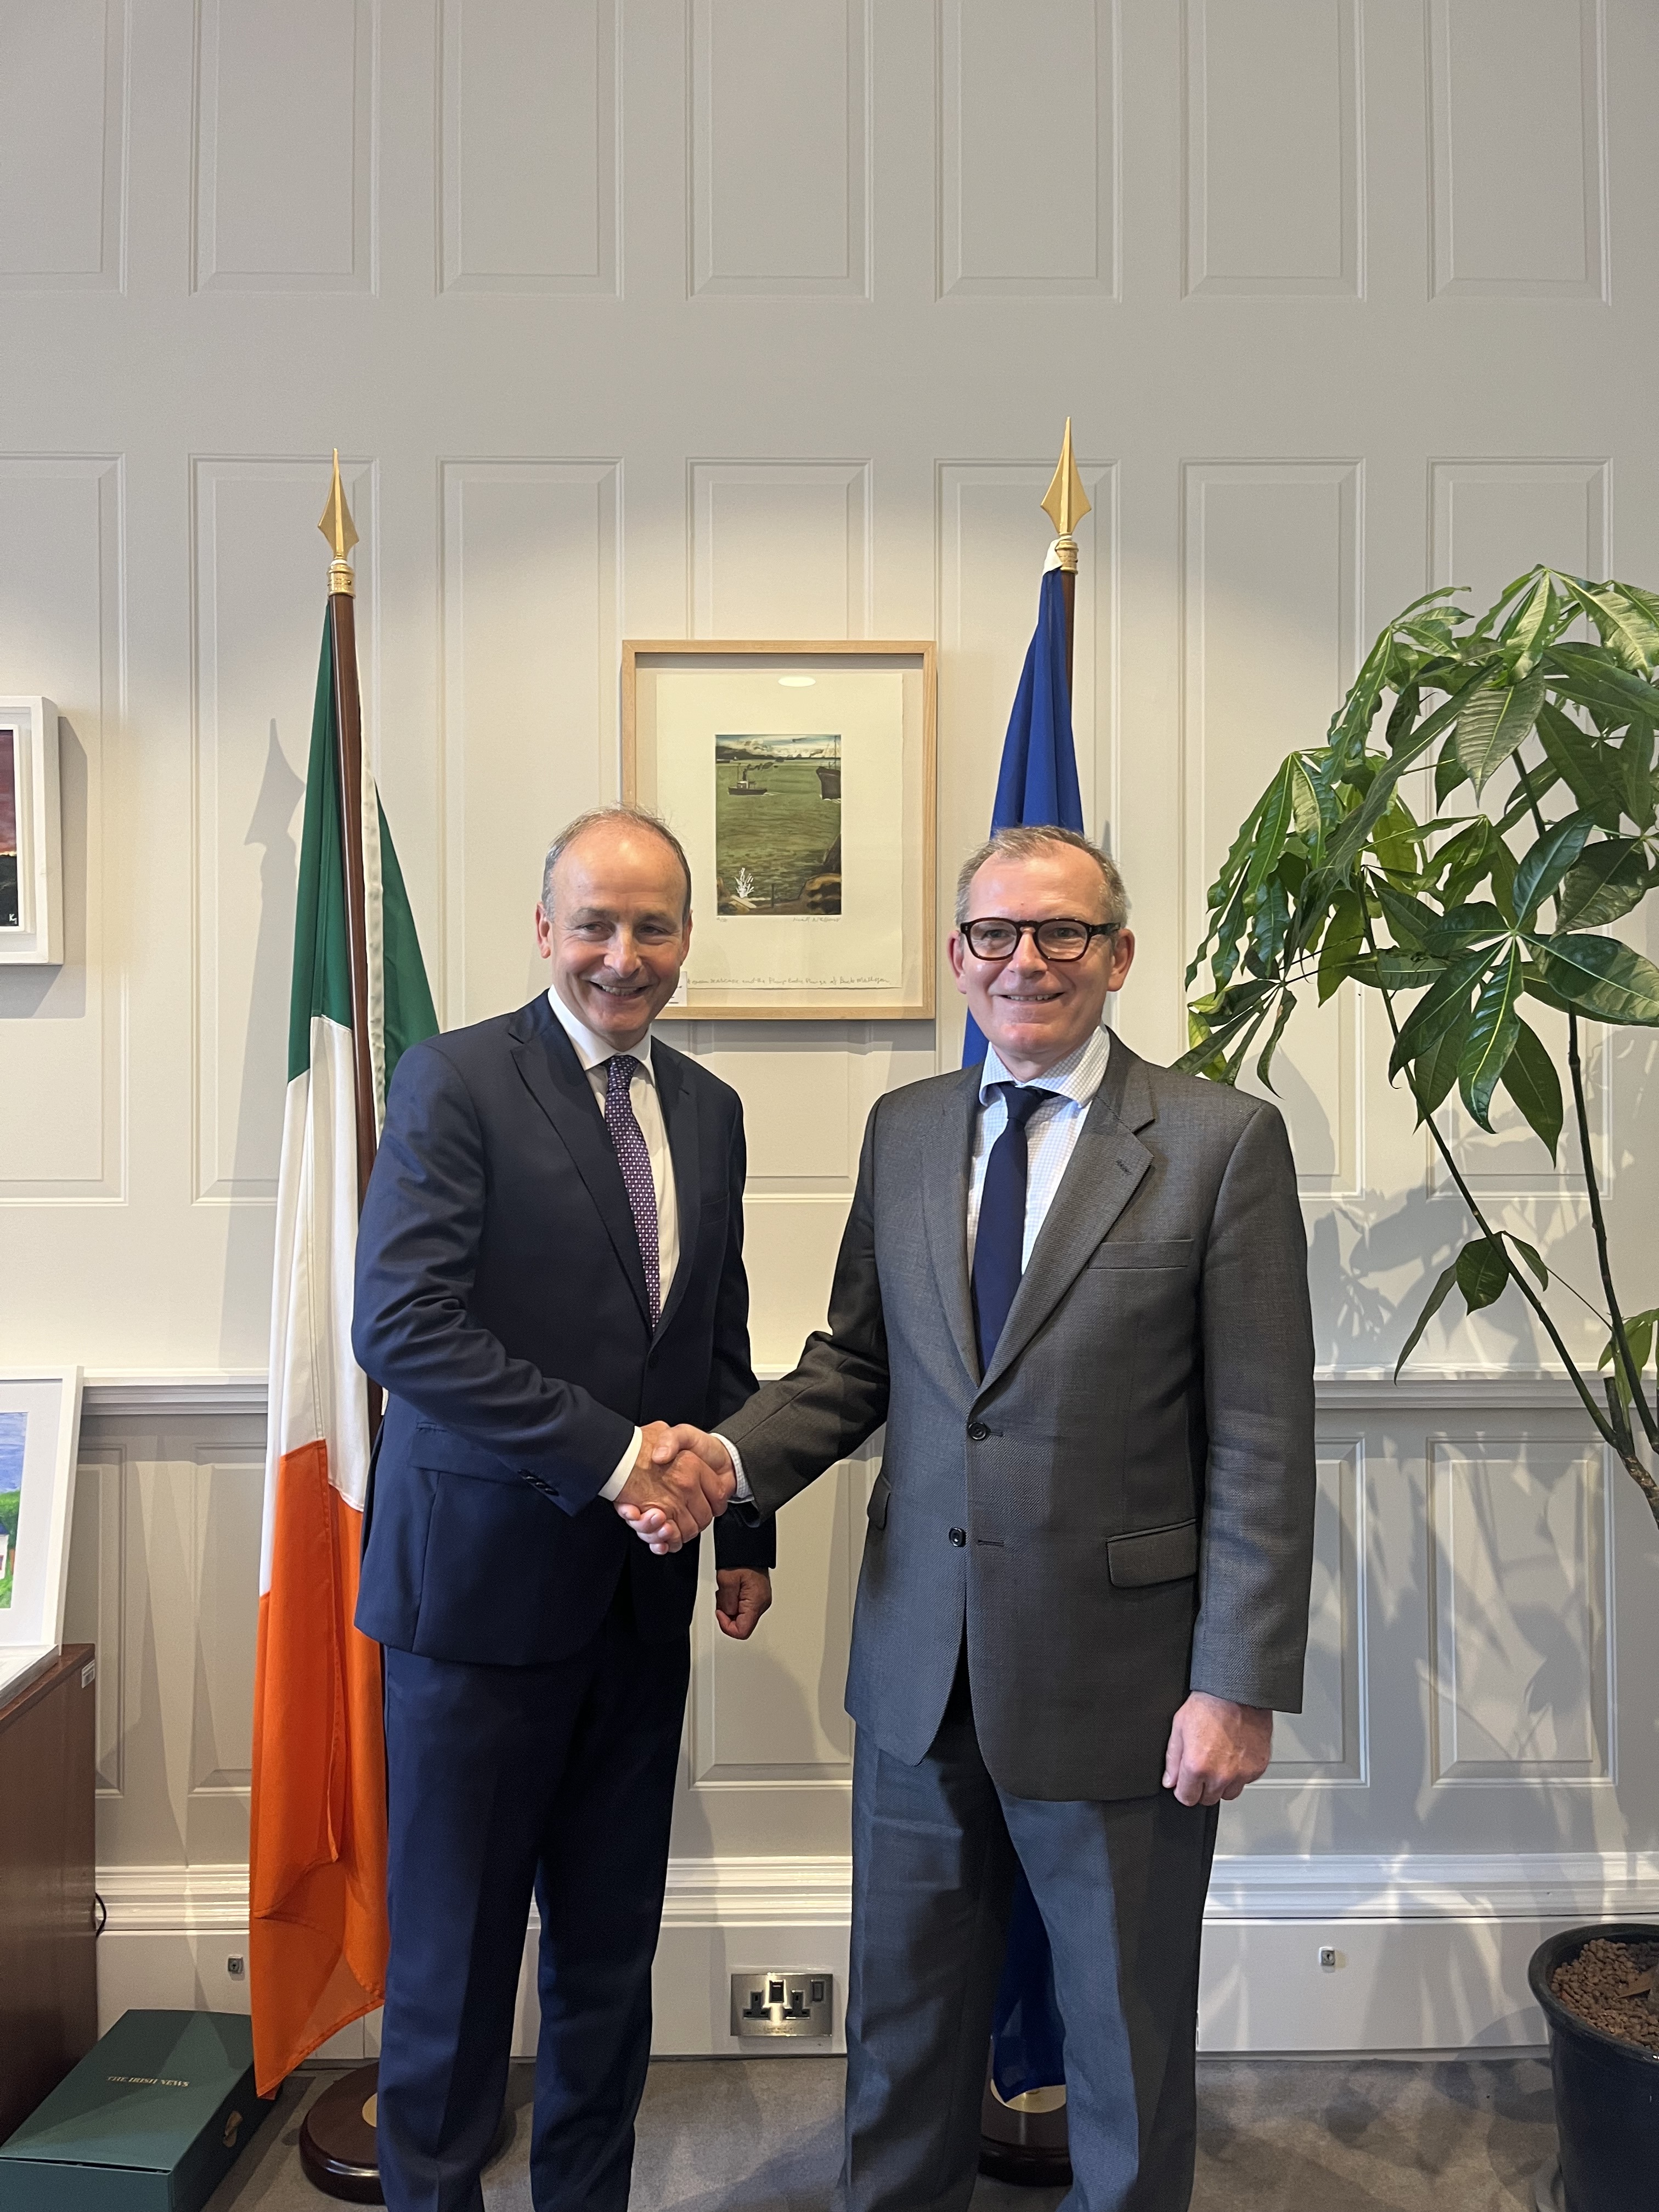 EDA Chief Executive visits Ireland for discussions on defence cooperation